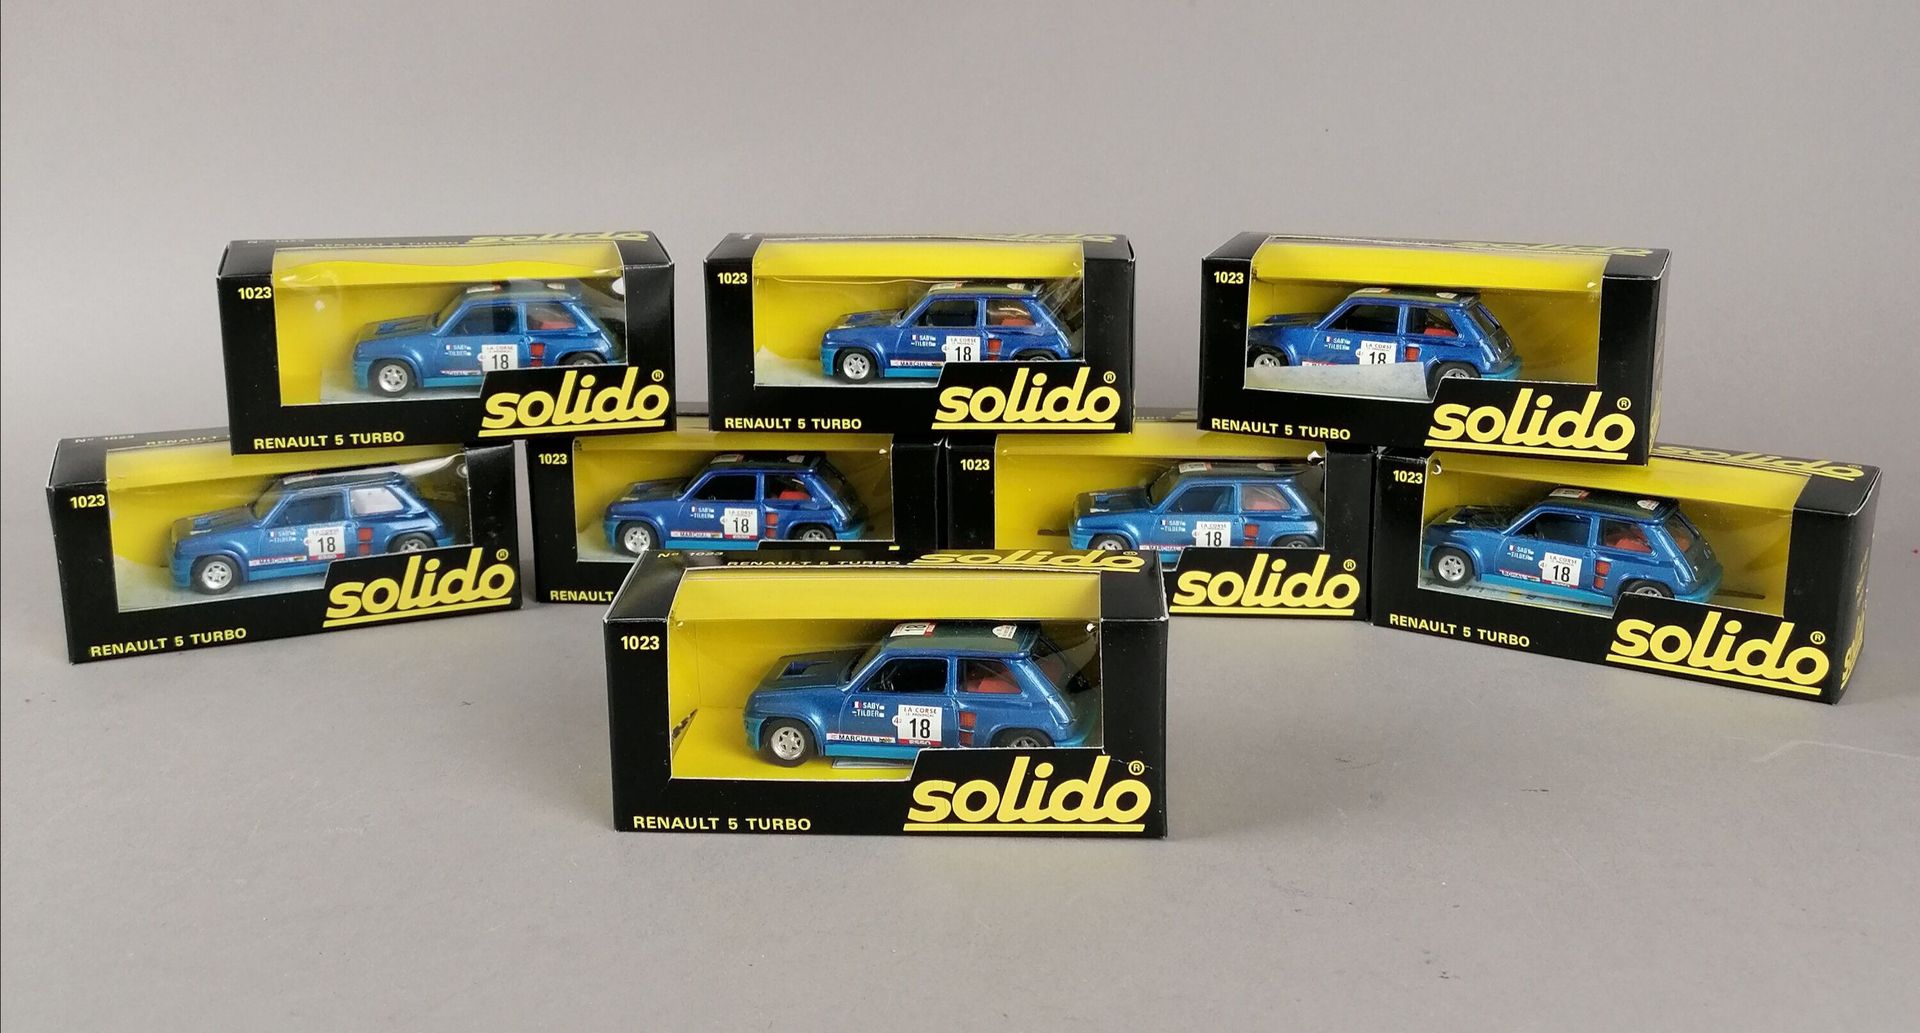 Null SOLIDO - 21 Renault 5 Turbo n°1023, scale 1/43 in their original boxes